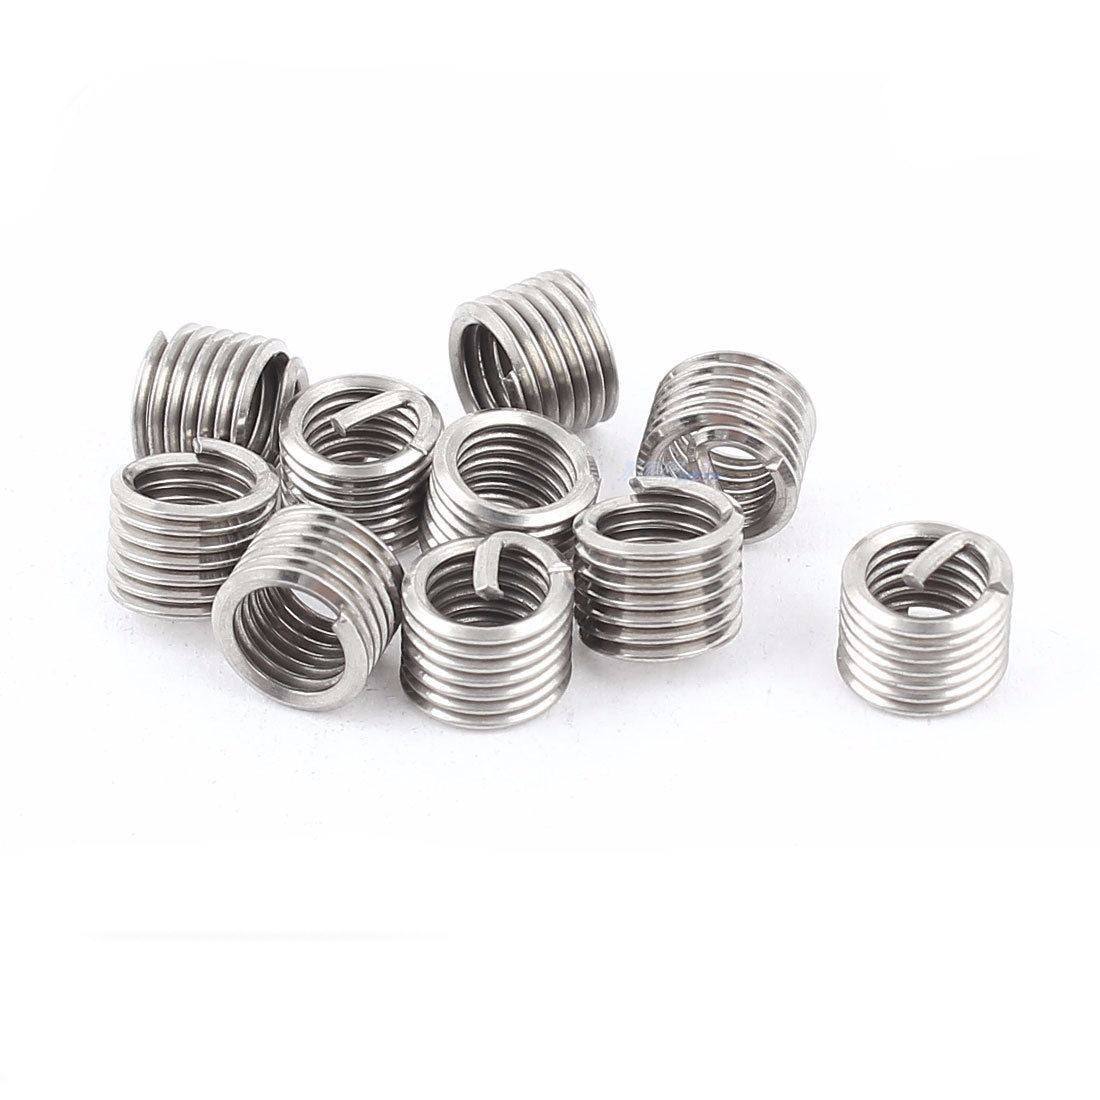 10Pcs 304 M6 x 1mm x 1.5D tainless Steel Helicoil Wire Thread Repair Inserts - TDRMOTO